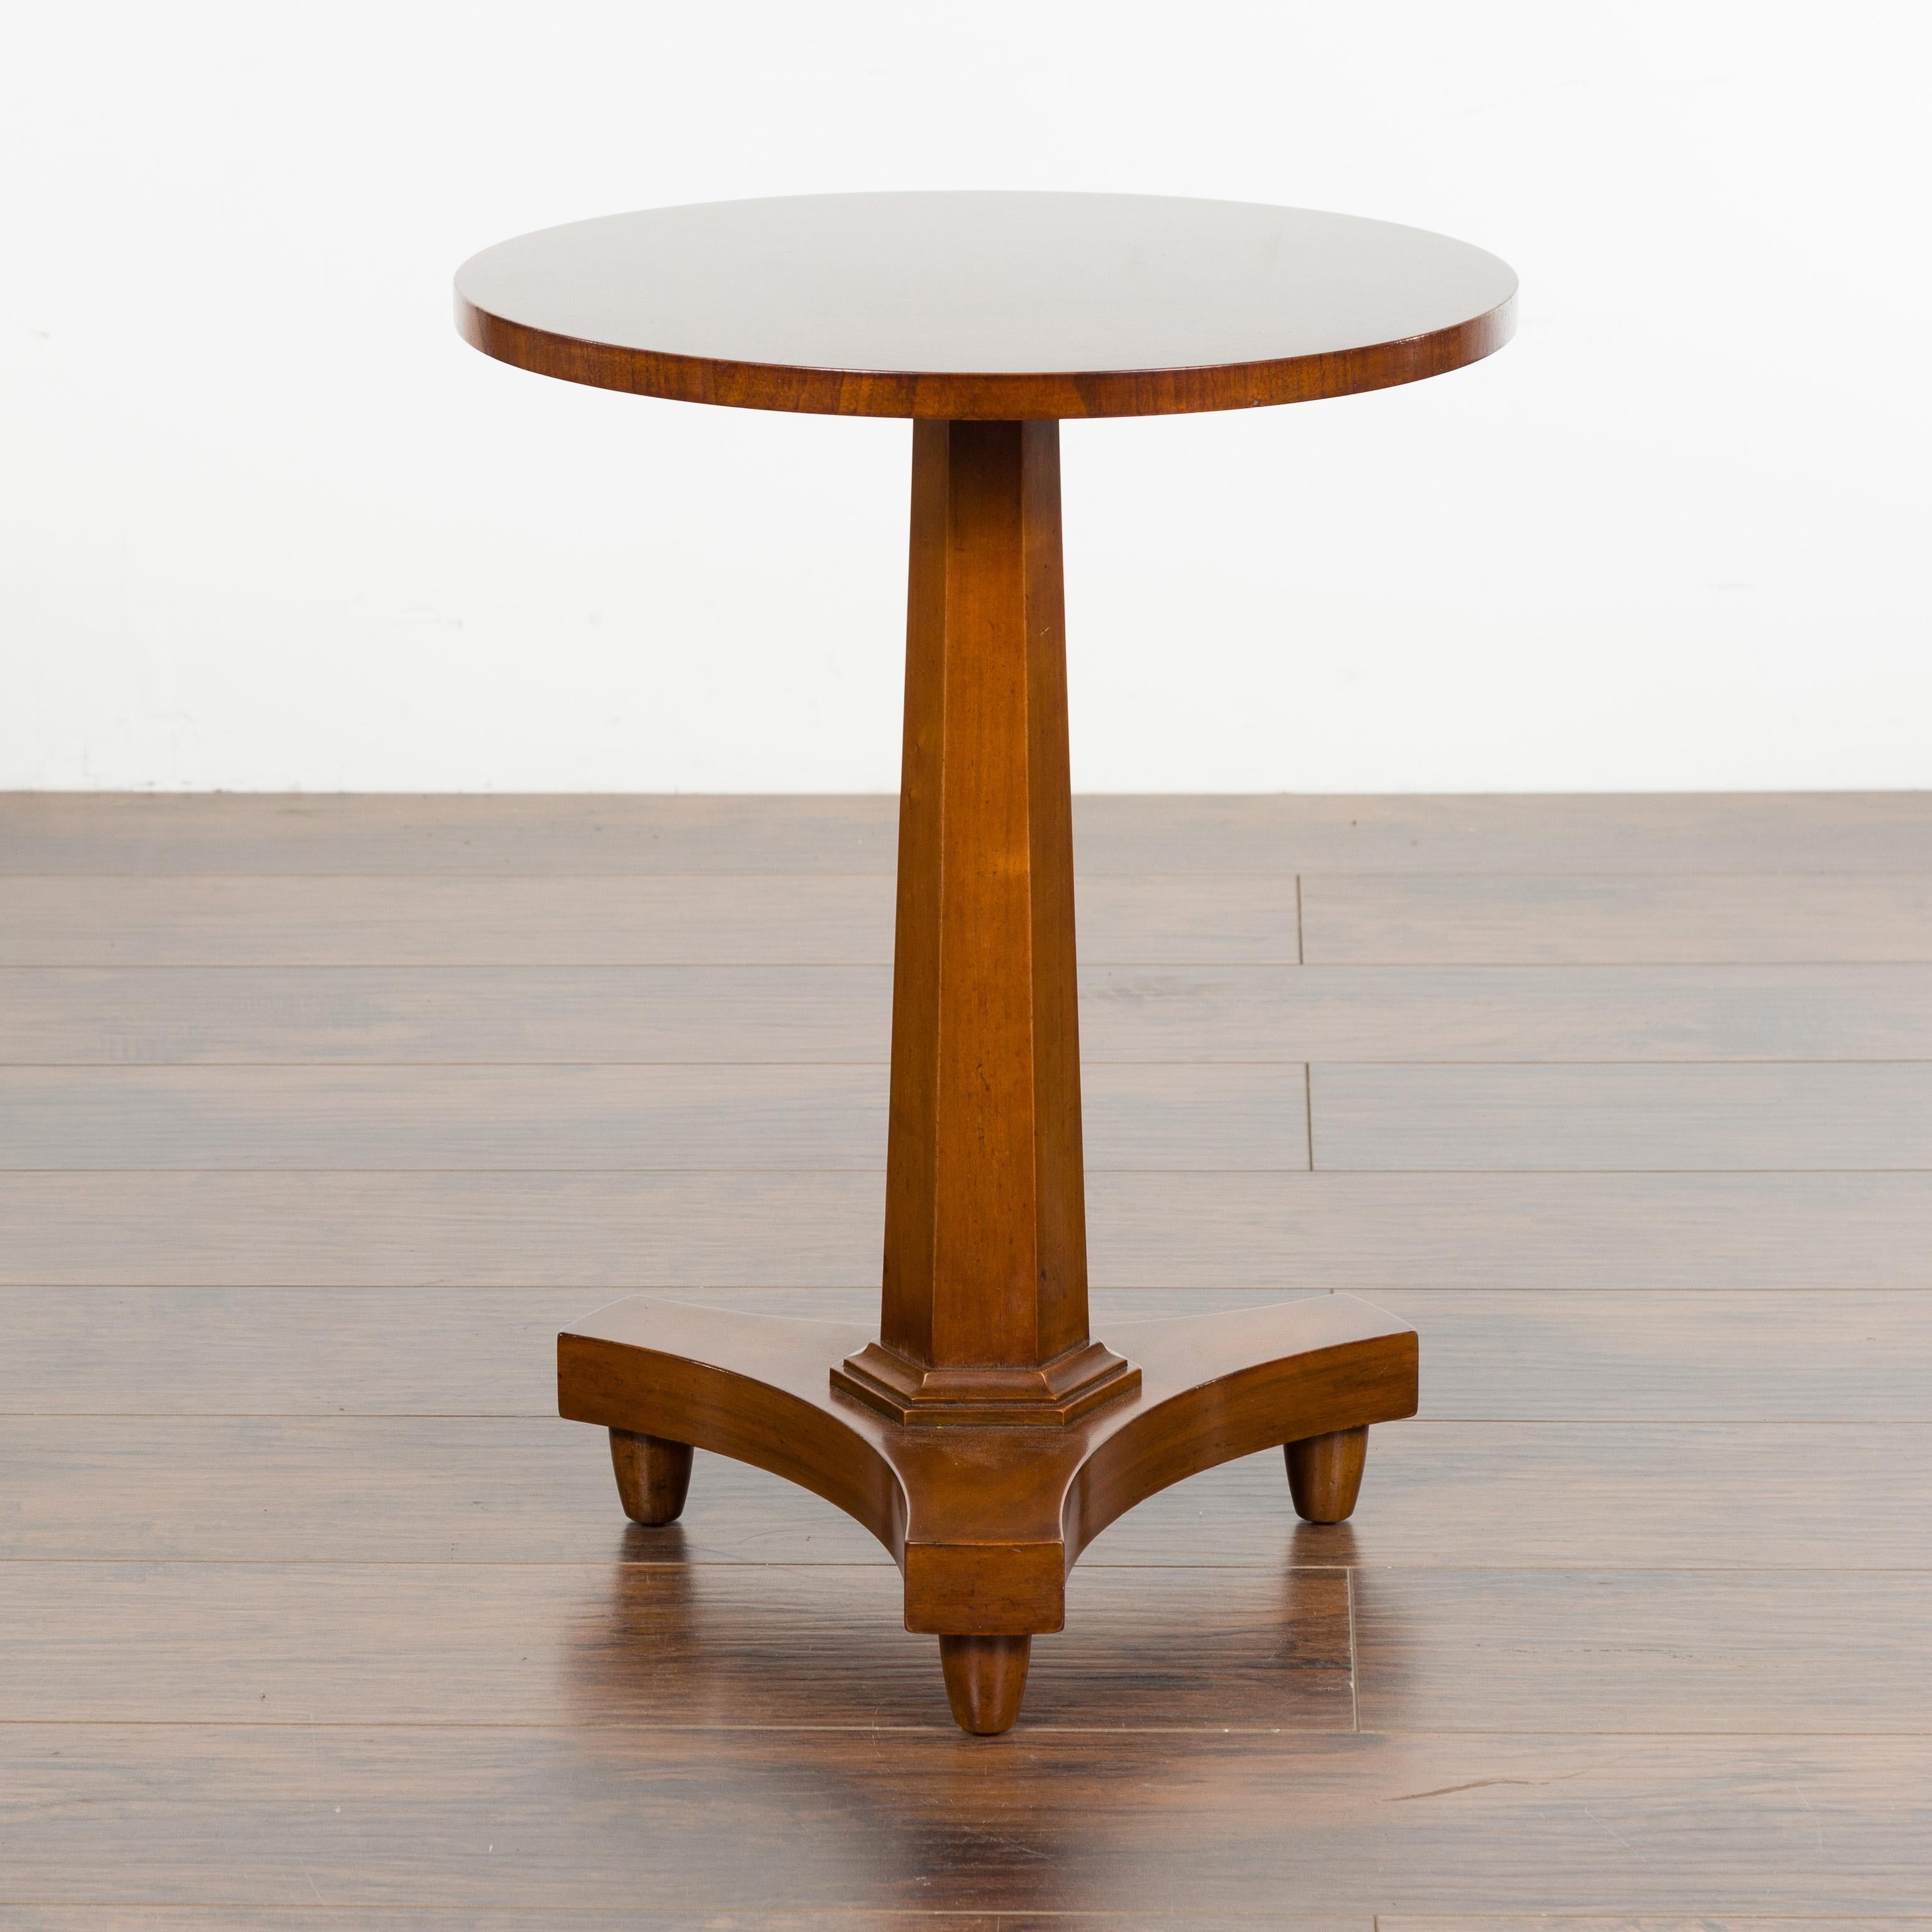 A small Baker walnut drink table from the mid 20th century, with round top and pedestal base. Made in the USA during the midcentury period, this drinks table features a circular top sitting above an hexagonal pedestal resting on an in-curving